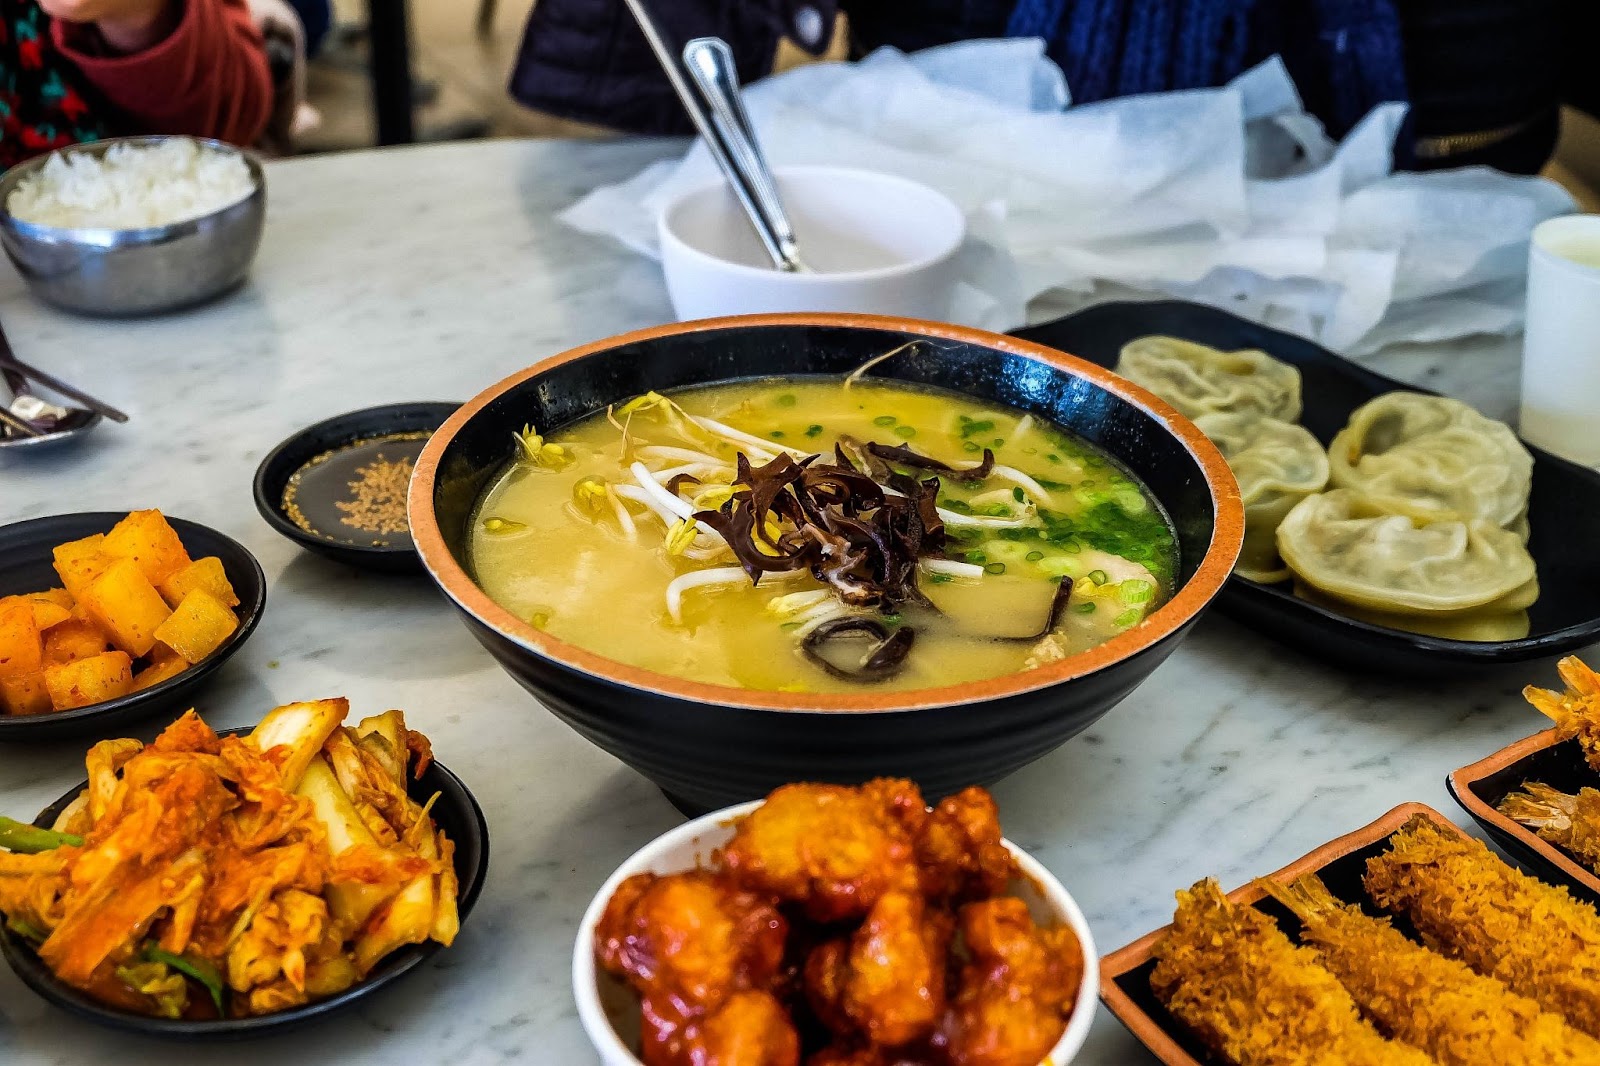 Korean cuisine on a marble countertop, including soup, dumplings, chicken and fried battered seafood